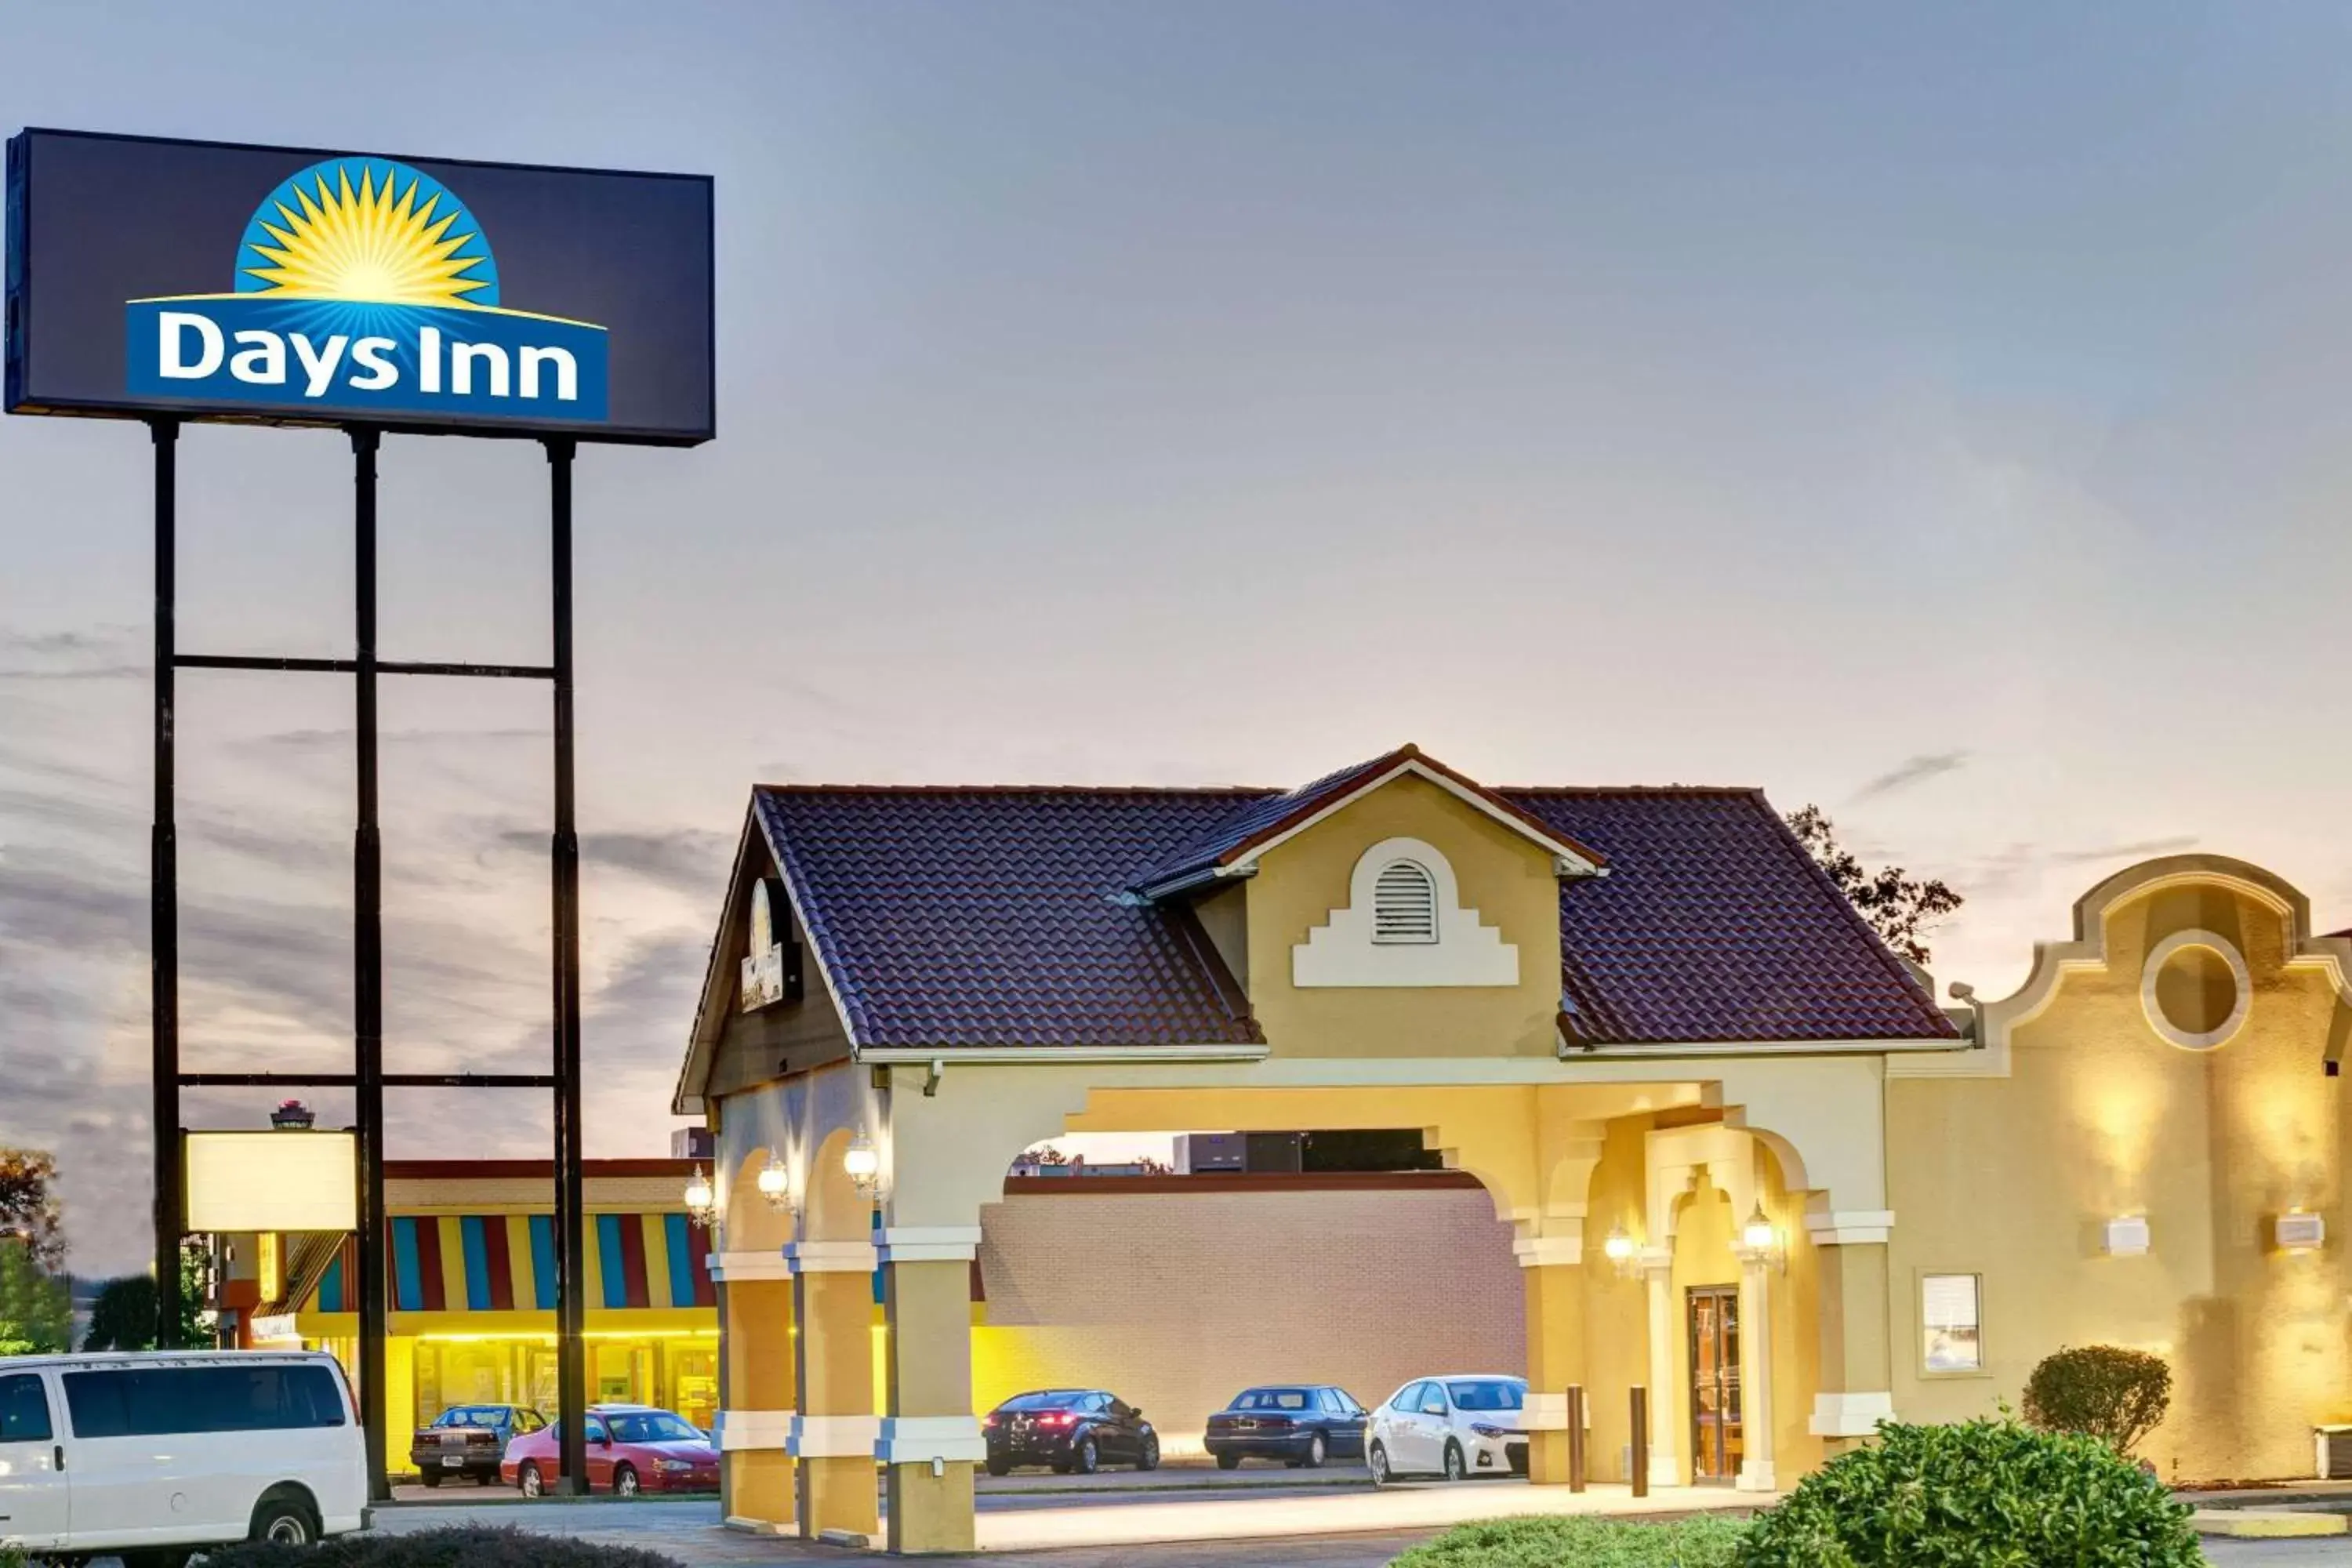 Property building in Days Inn by Wyndham Louisville Airport Fair and Expo Center